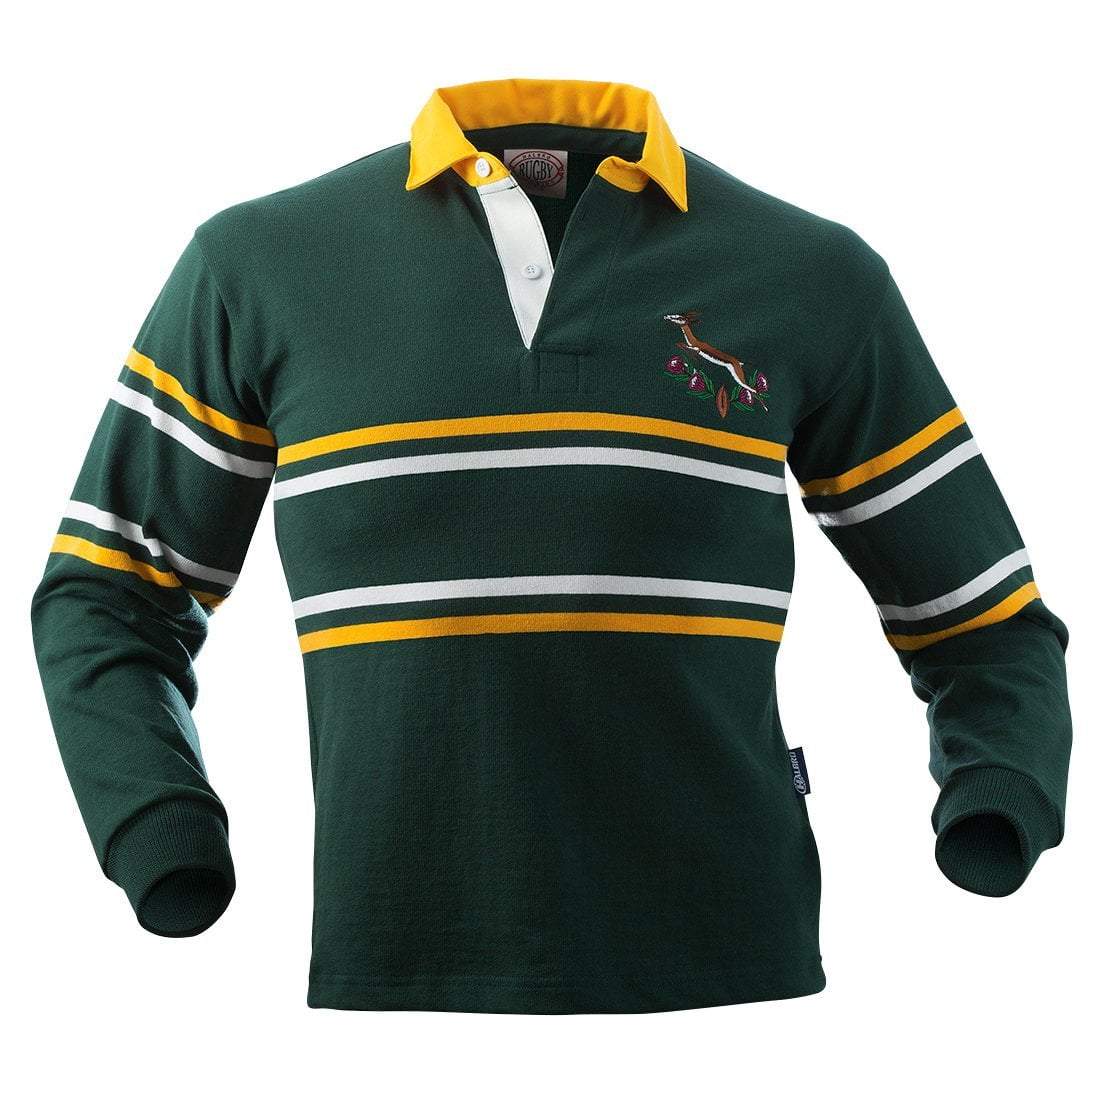 South Africa Springboks Rugby Gear and Apparel